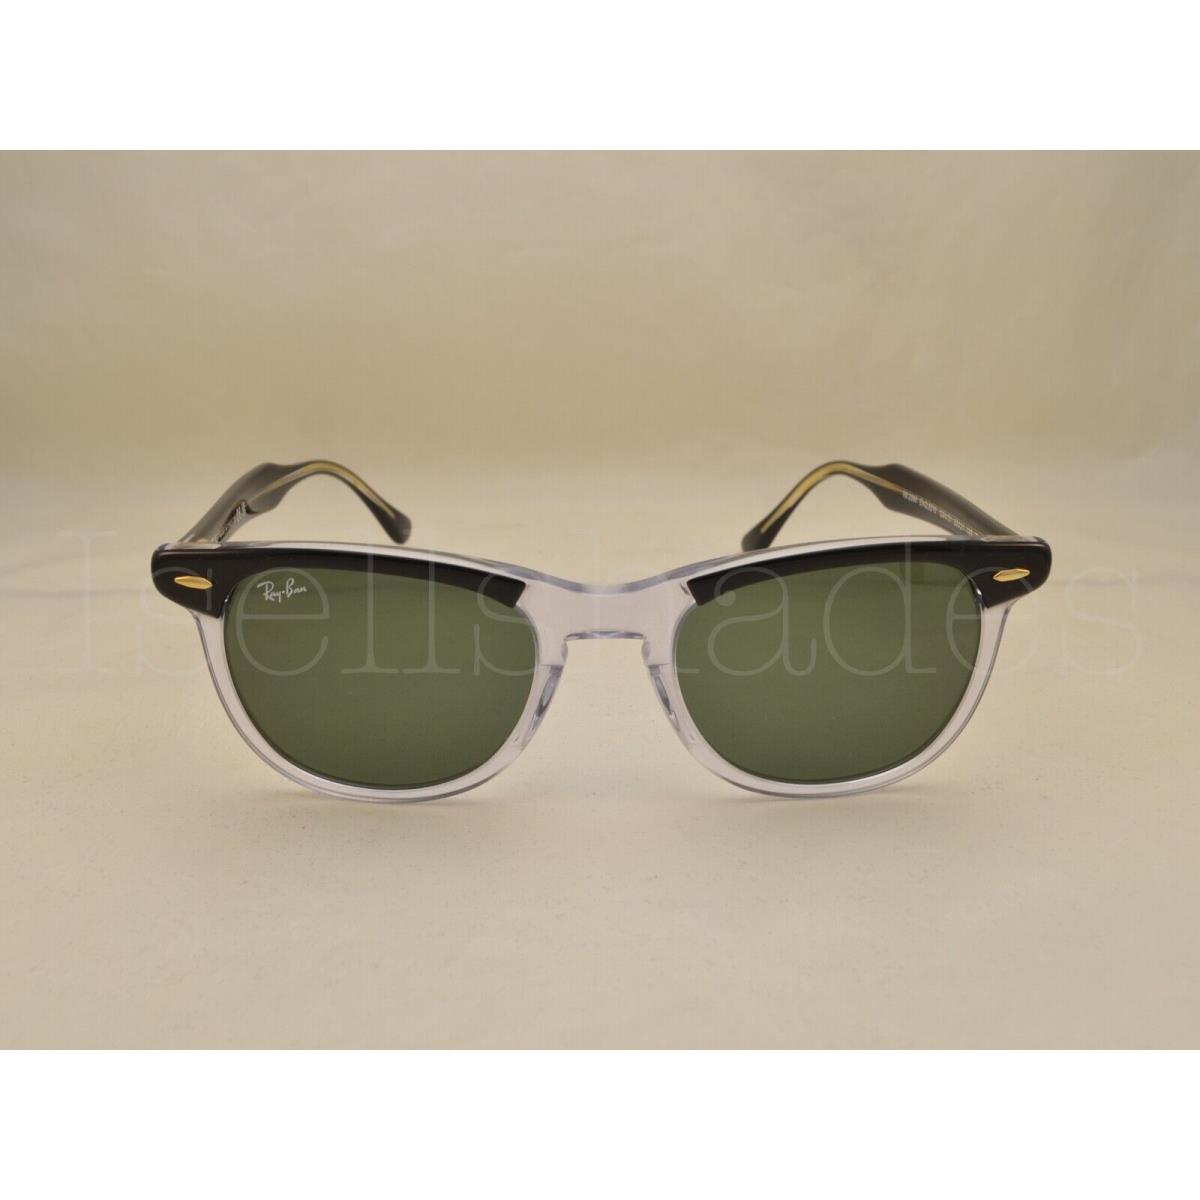 Ray Ban Eagleeye RB2398-129431 53 Black On Transparent with Green Lens - Frame: BLACK ON TRANSPARENT, Lens: GREEN